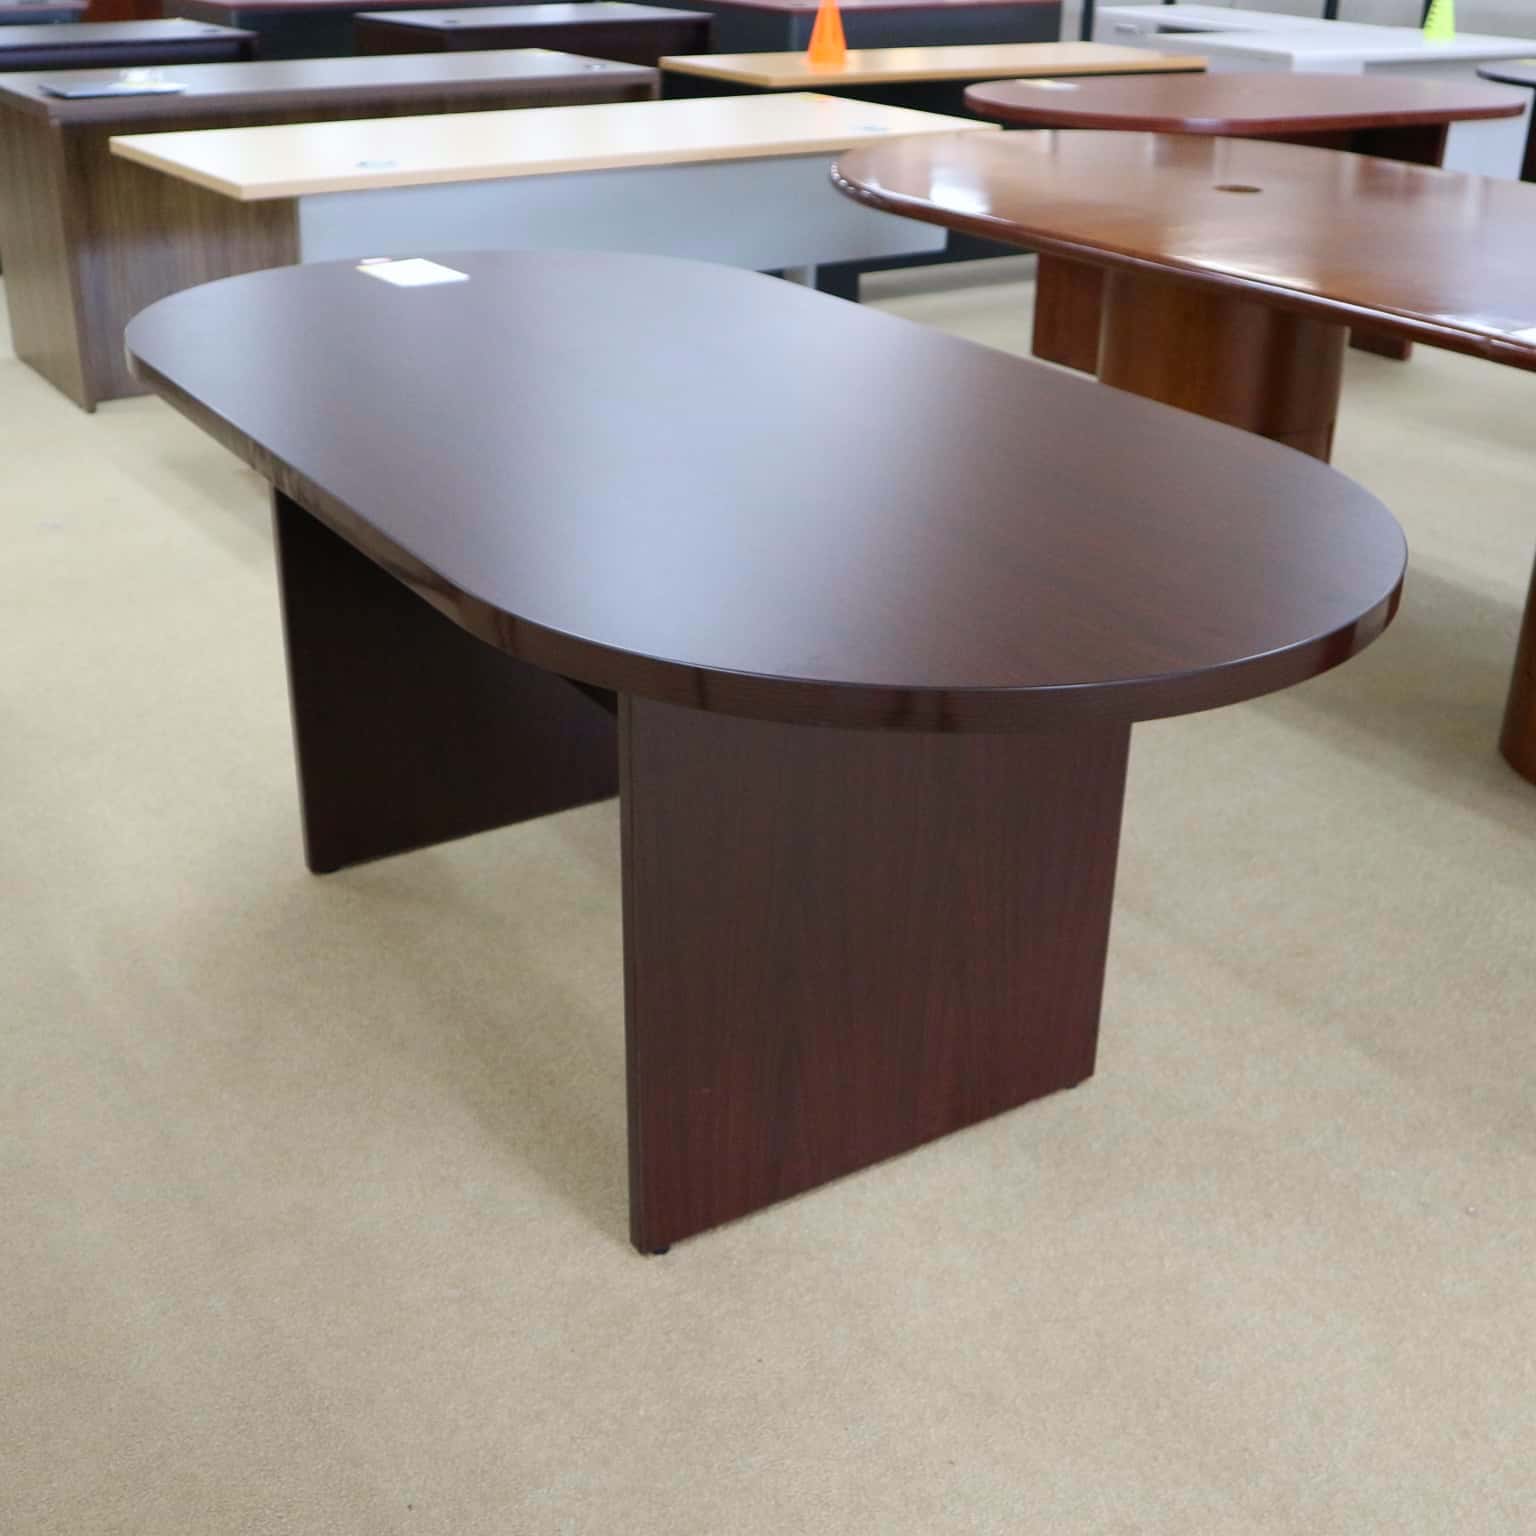 Conference Table 6'L x 3'D